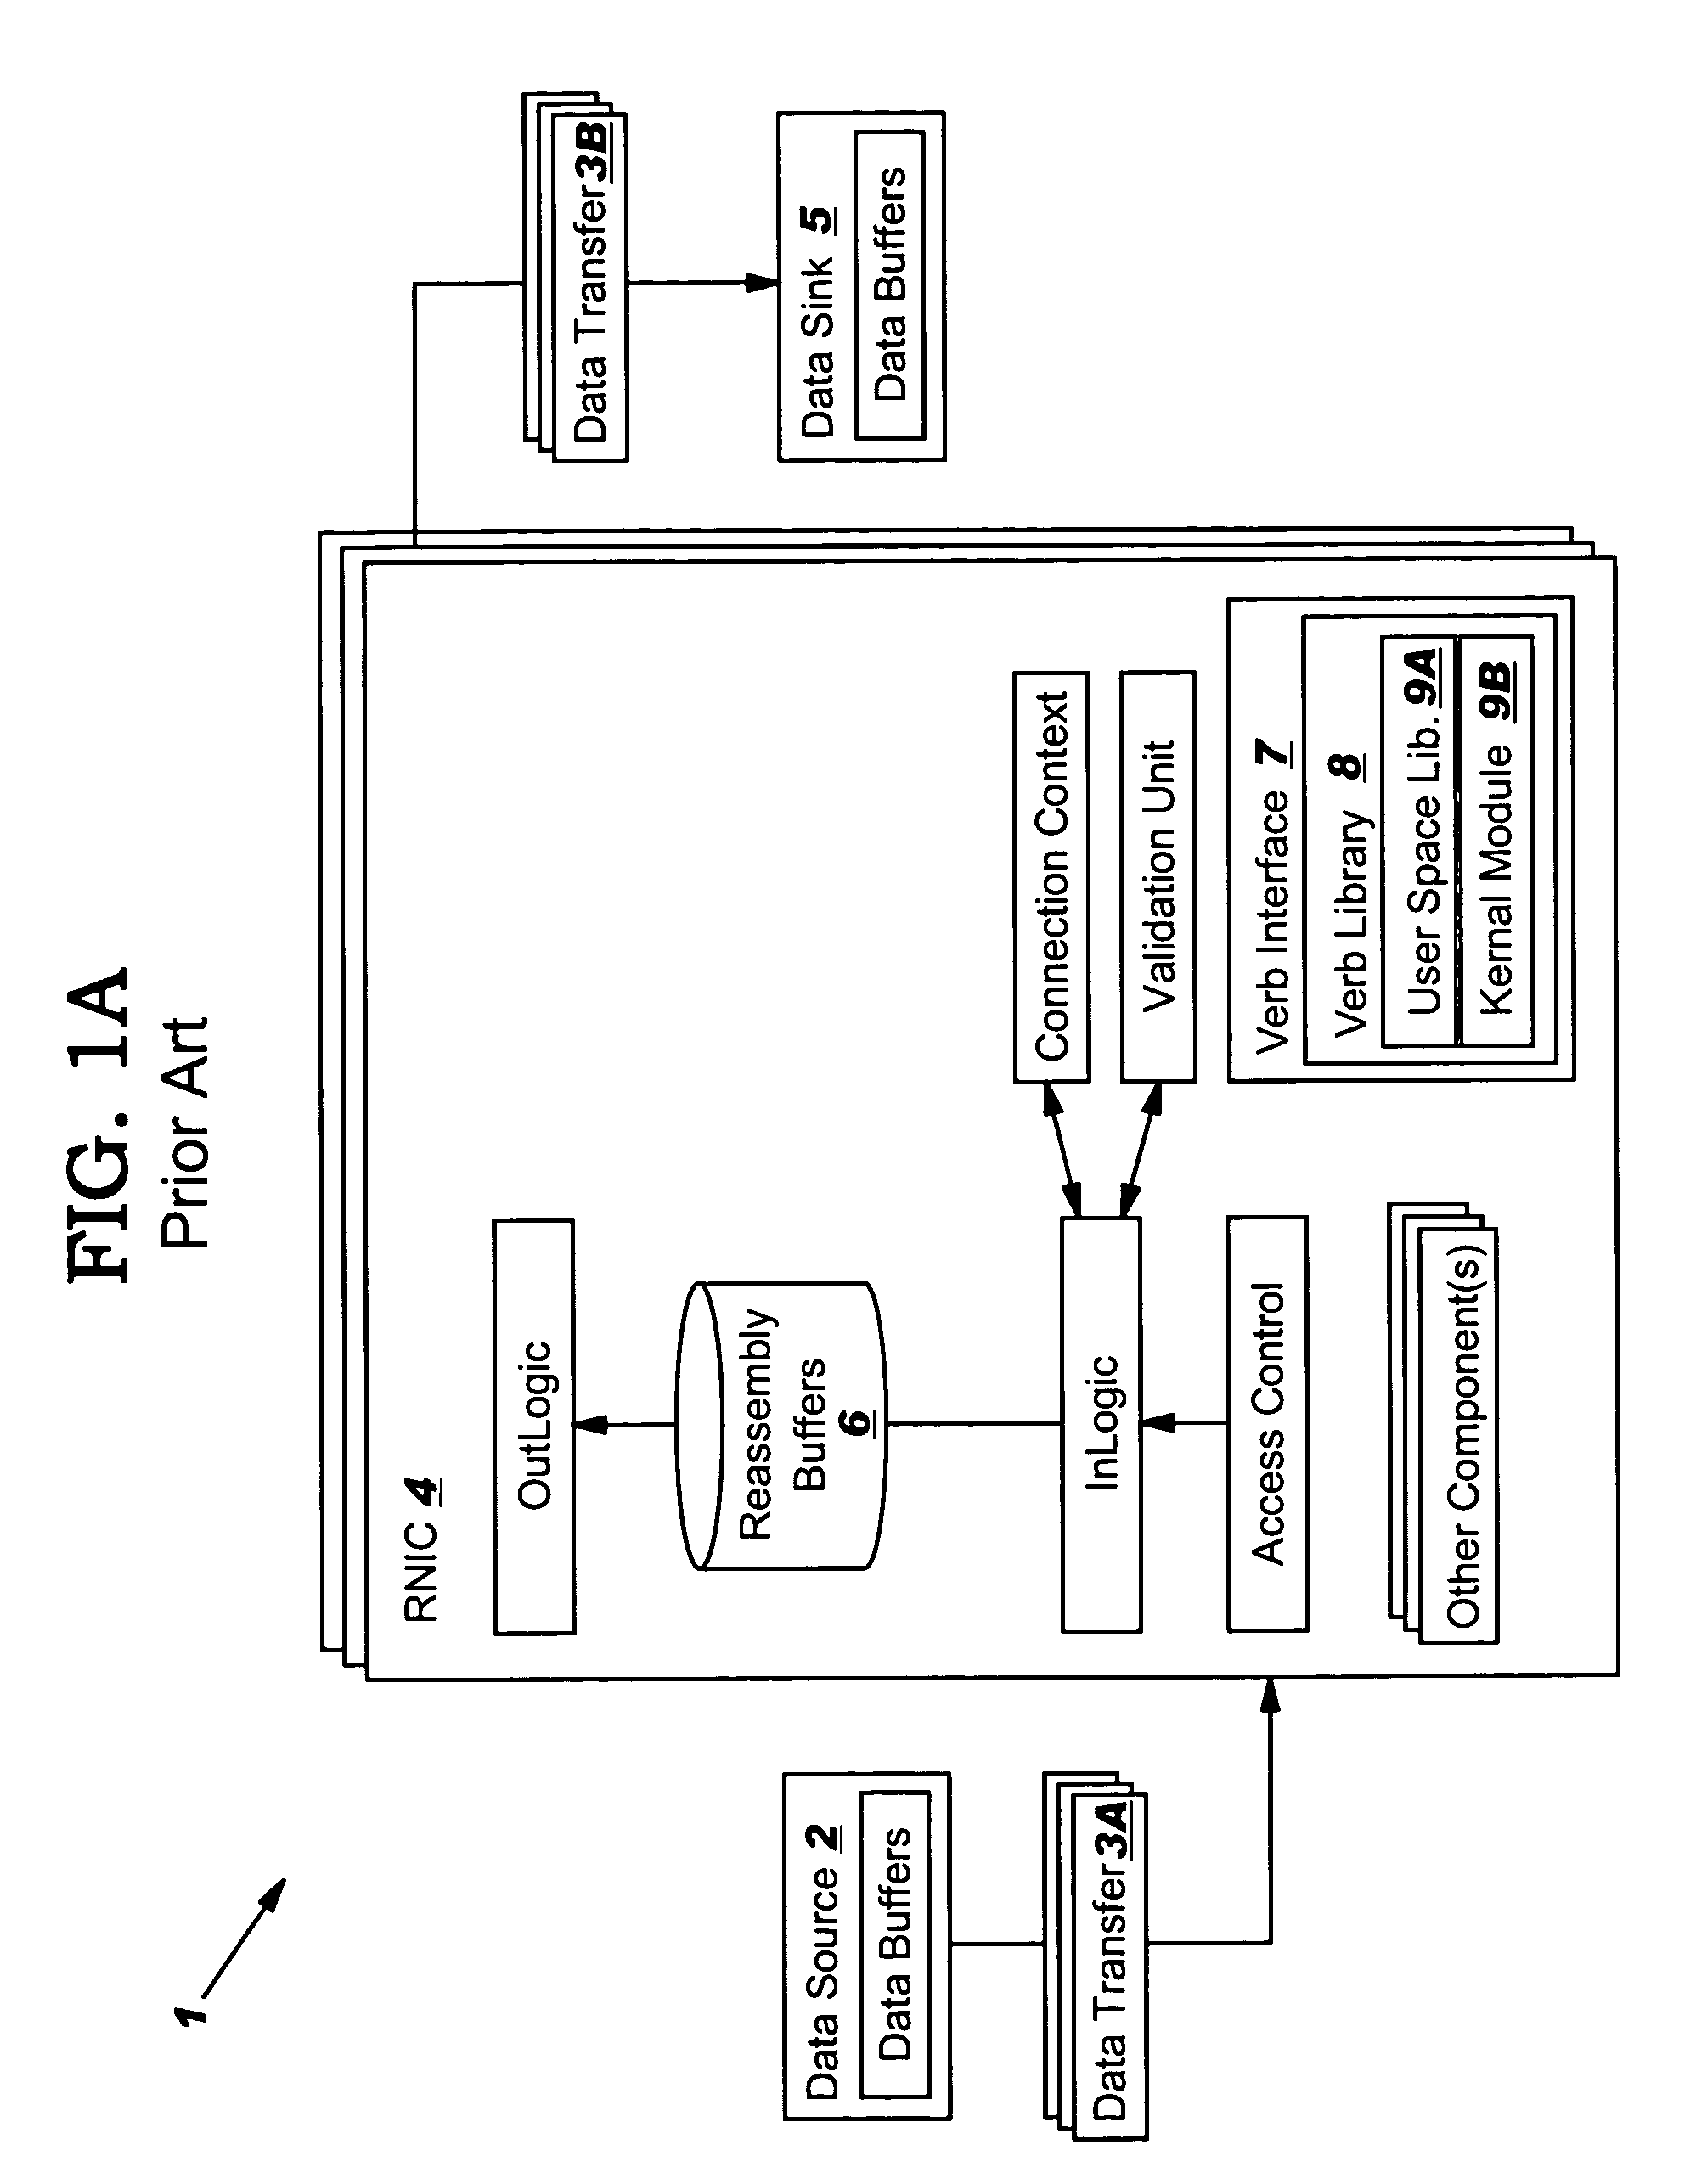 Reducing number of write operations relative to delivery of out-of-order RDMA send messages by managing reference counter